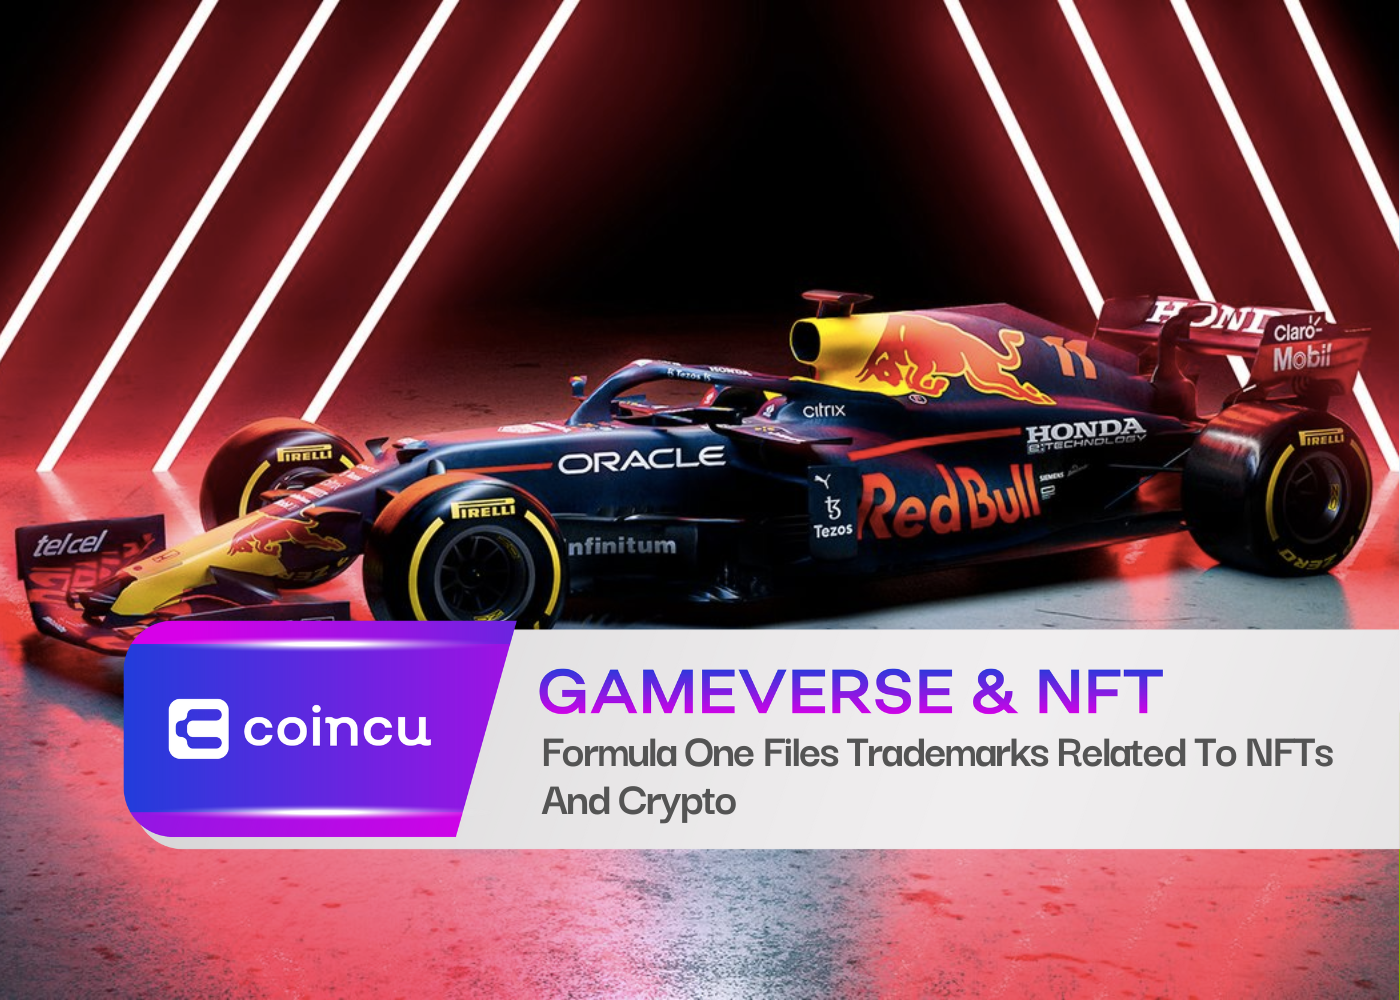 Formula One Files Trademarks Related To NFTs And Crypto